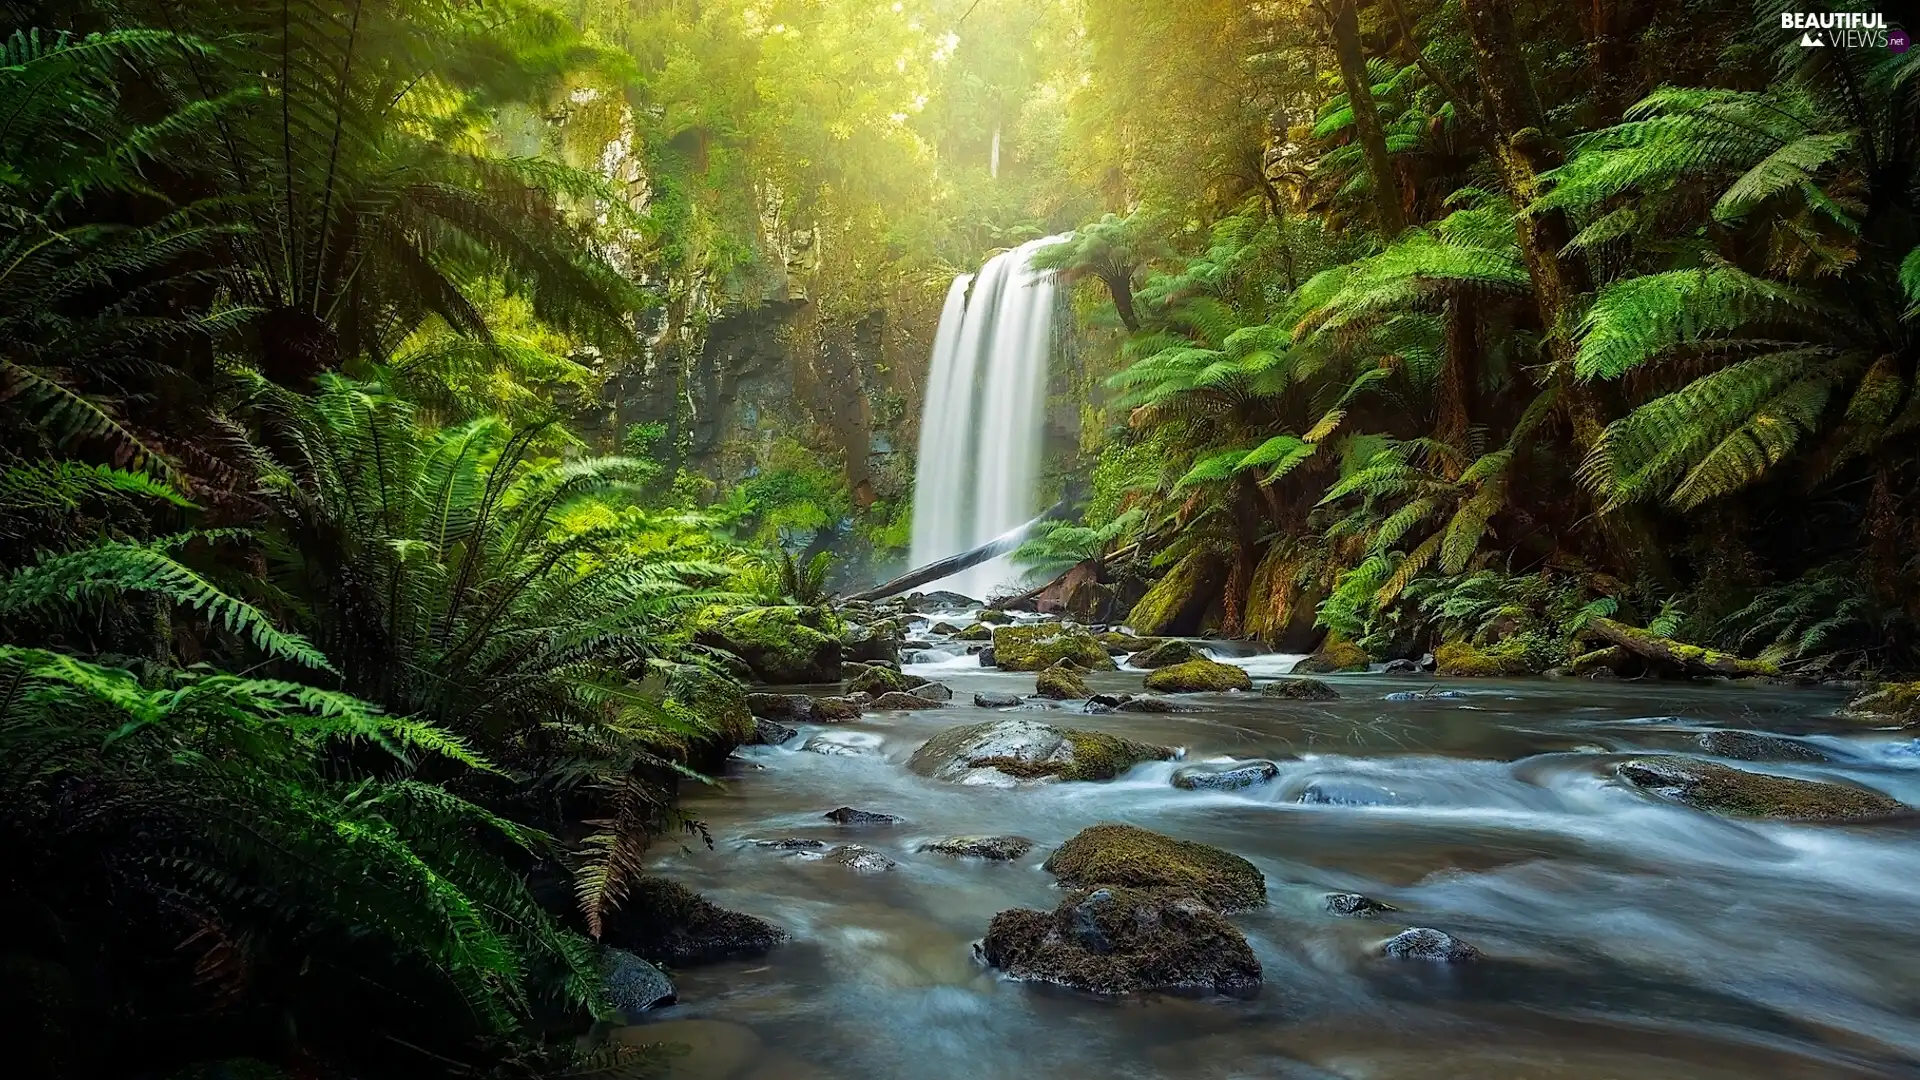 Australia, Great Otway National Park, forest, State of Victoria, Hopetoun Falls, Aire River, fern